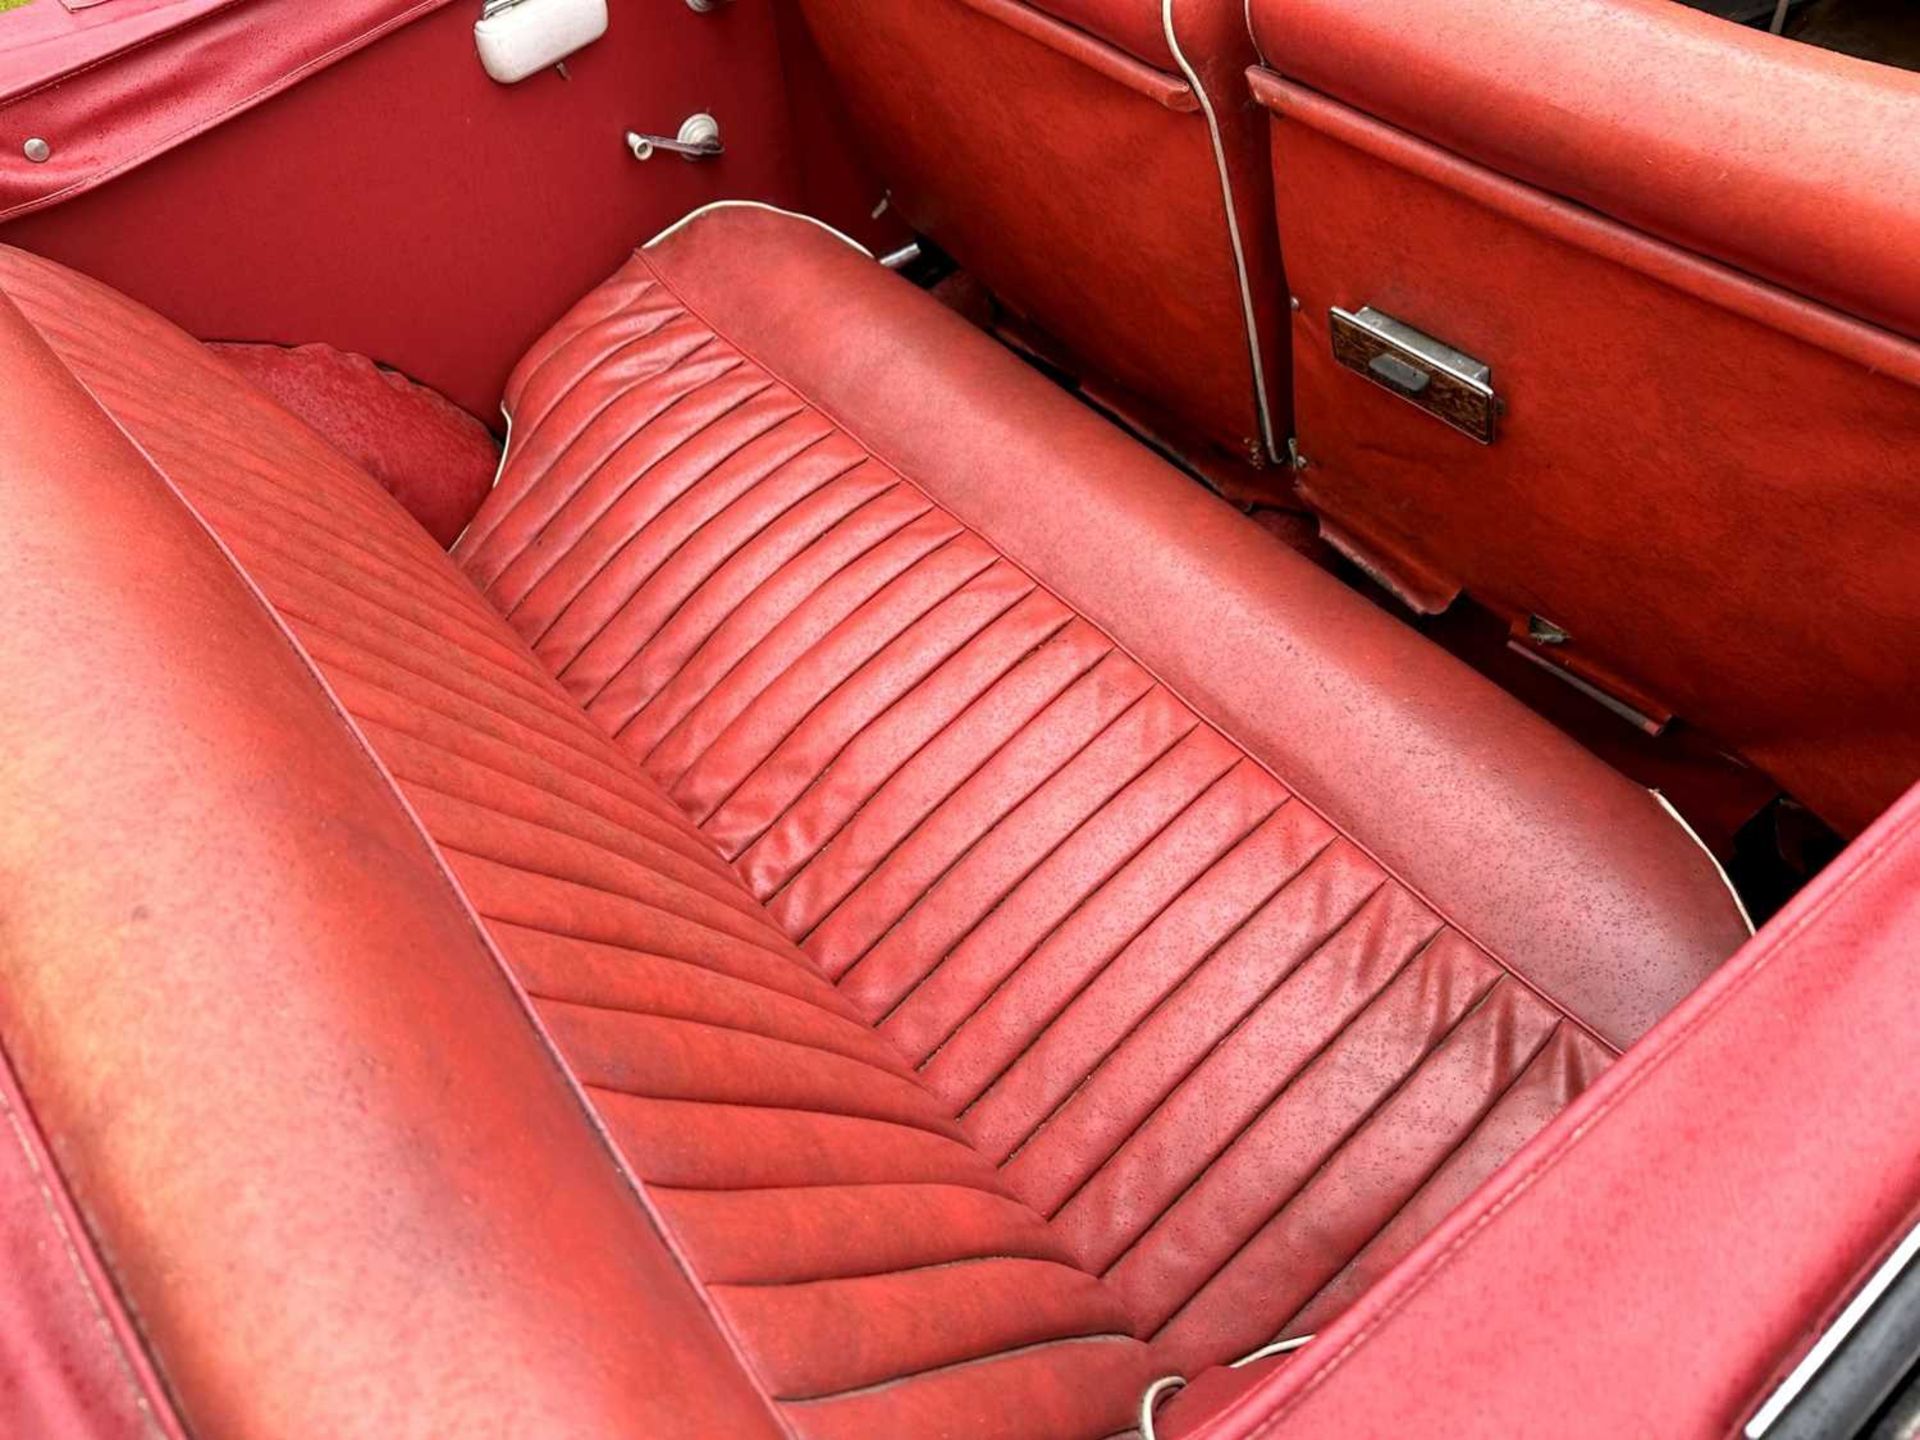 1961 Singer Gazelle Convertible Comes complete with overdrive, period radio and badge bar - Image 55 of 95